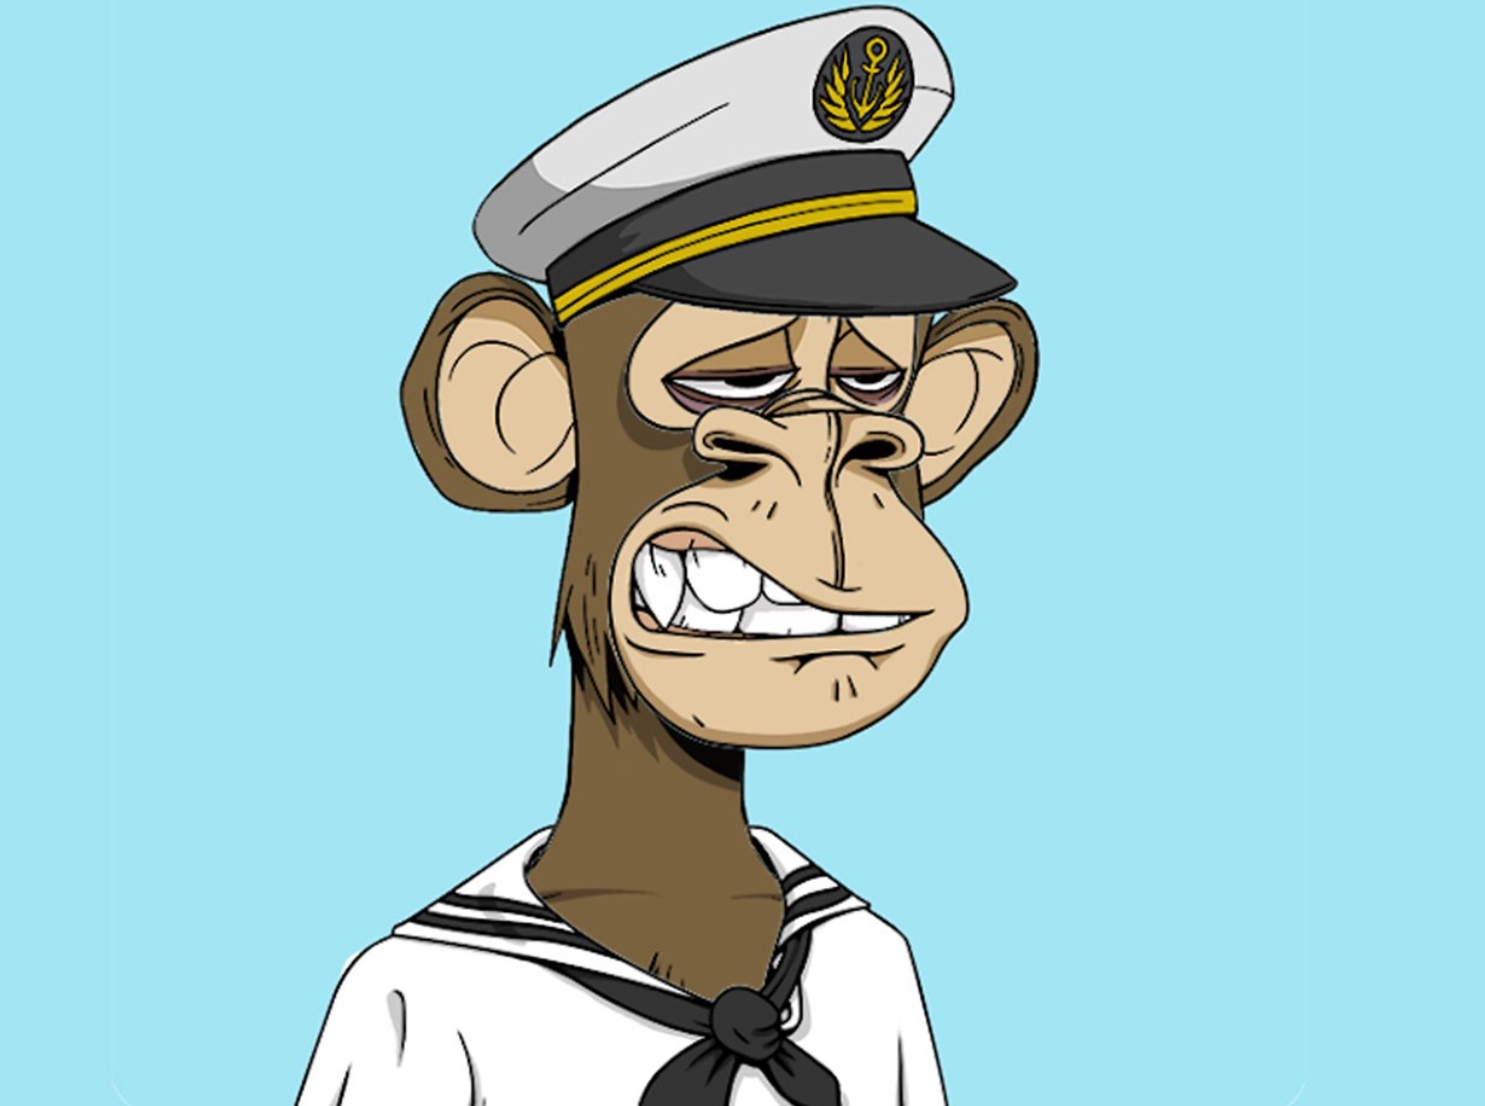 Bored Ape Yacht Club Roadmap: What to Expect From BAYC in 2022